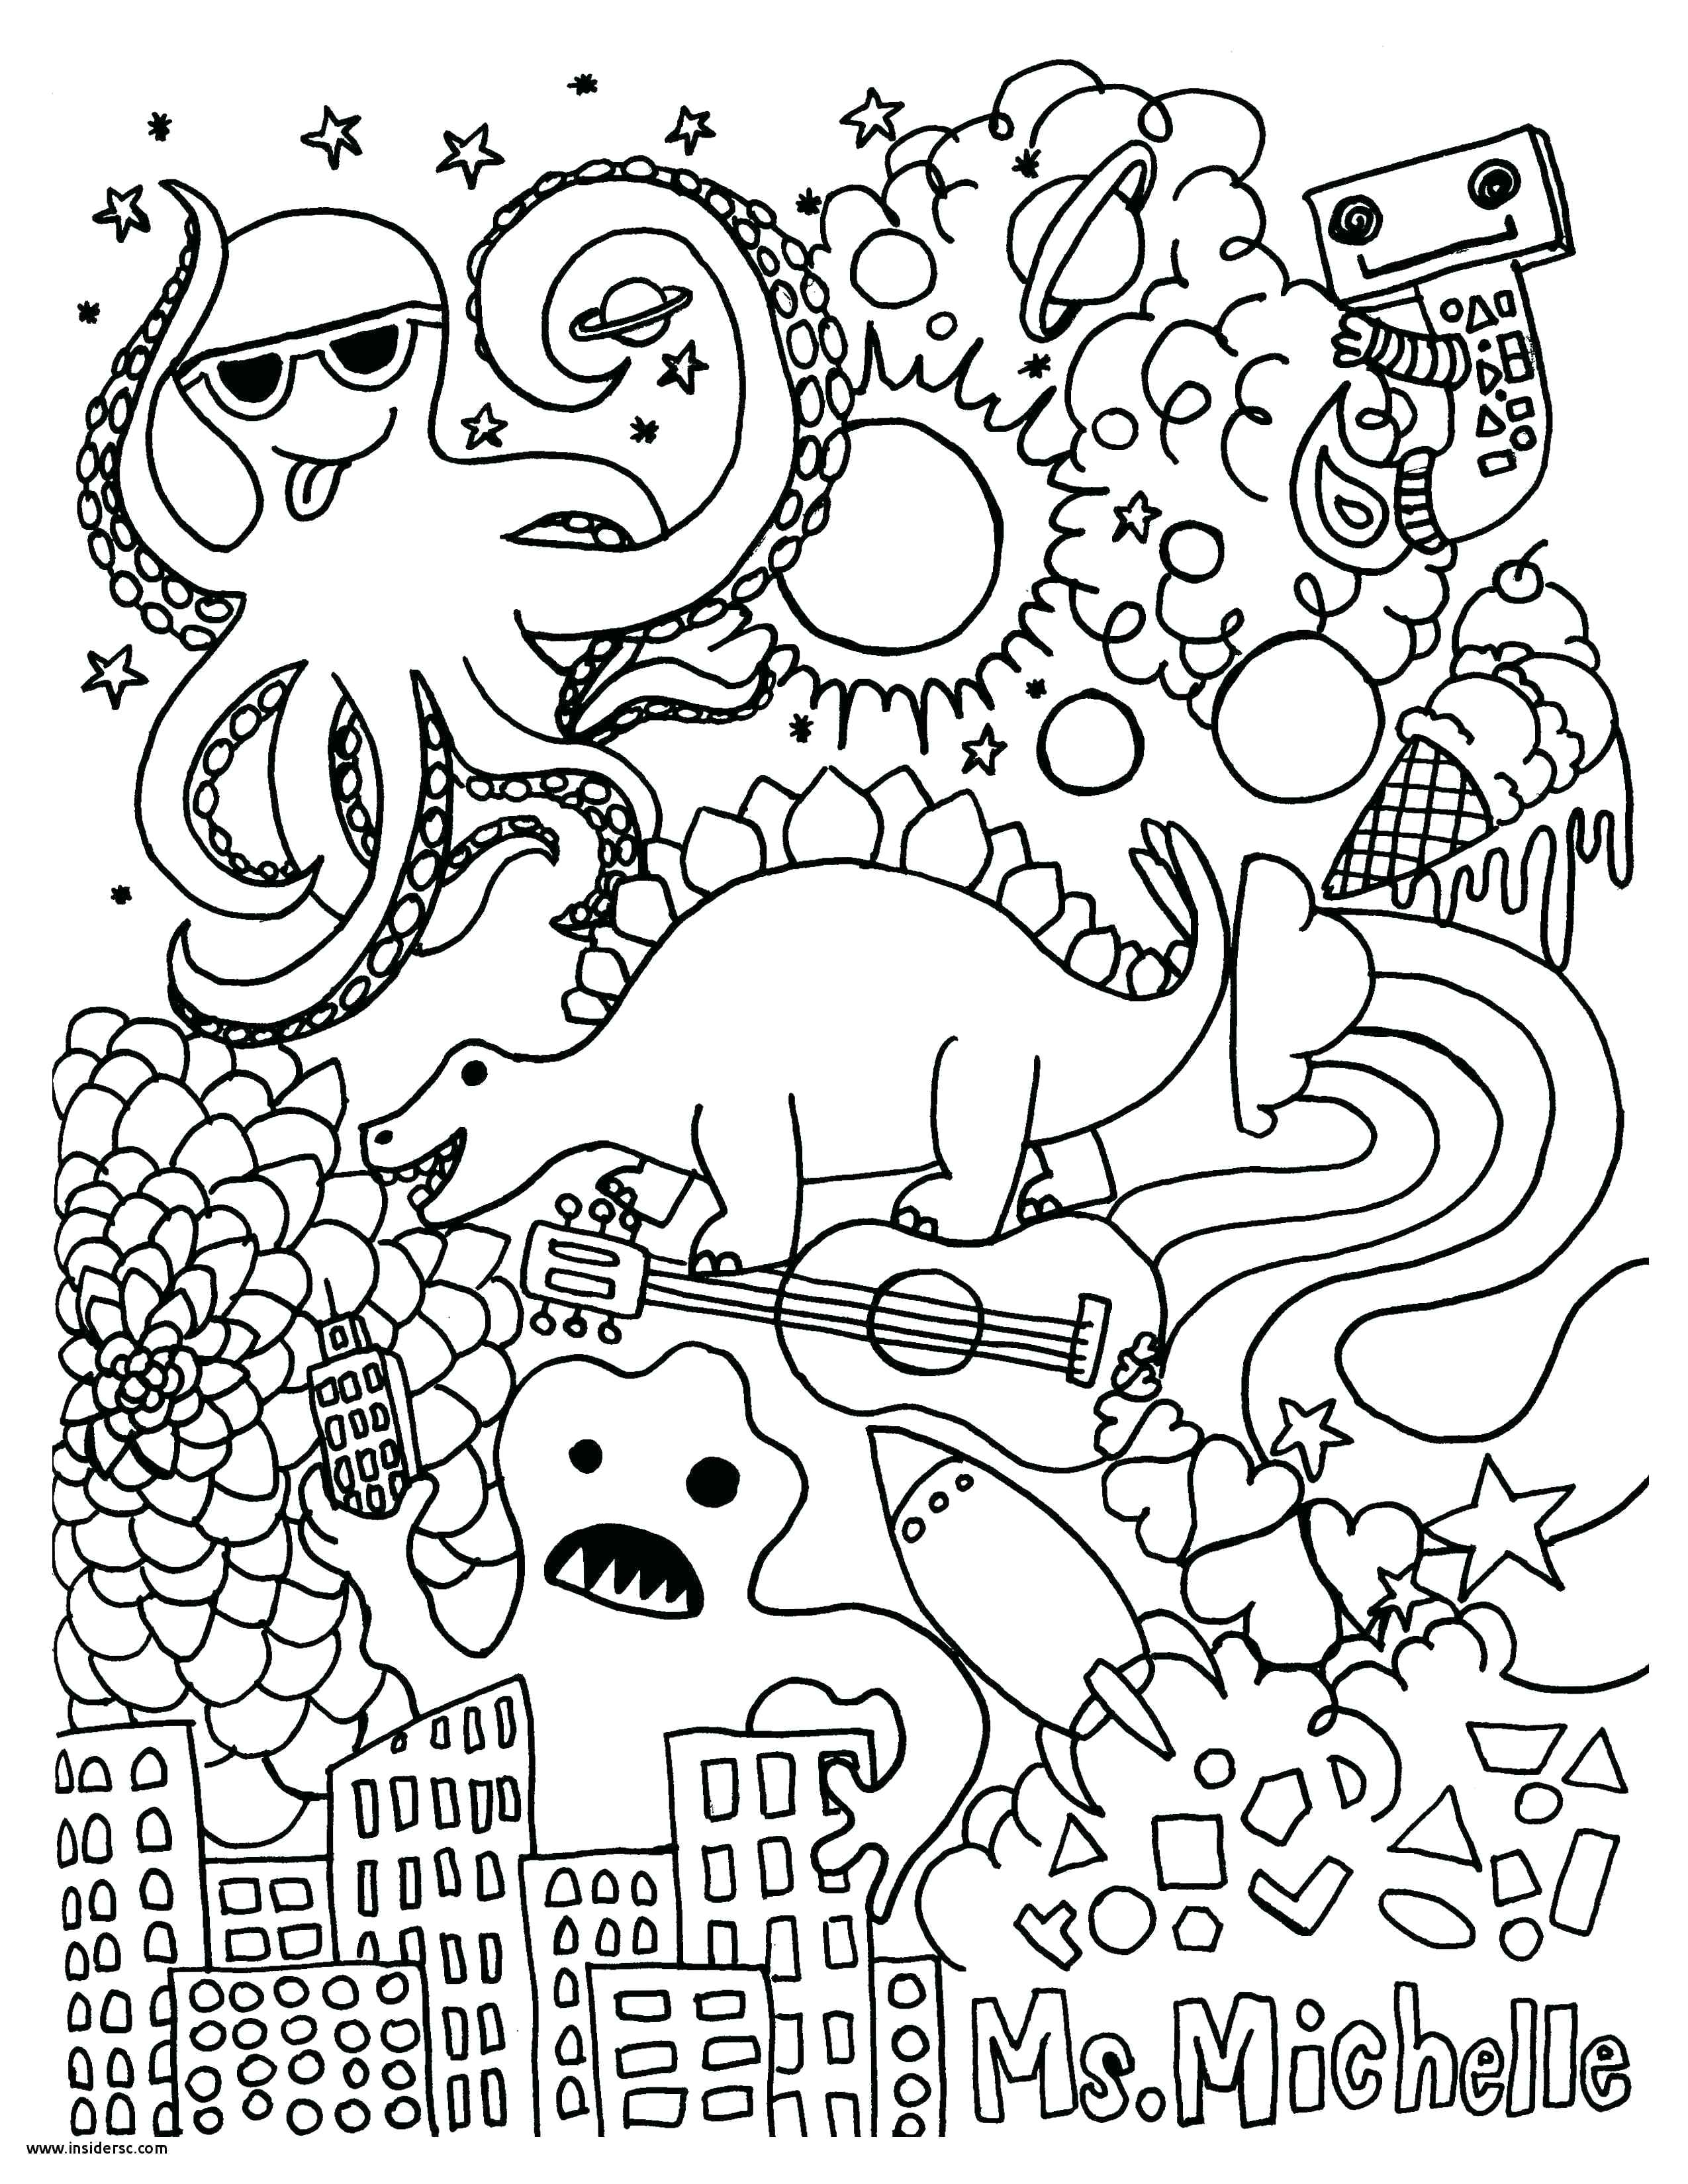 coloring ~ Free Printabless Coloring Pages Image ...